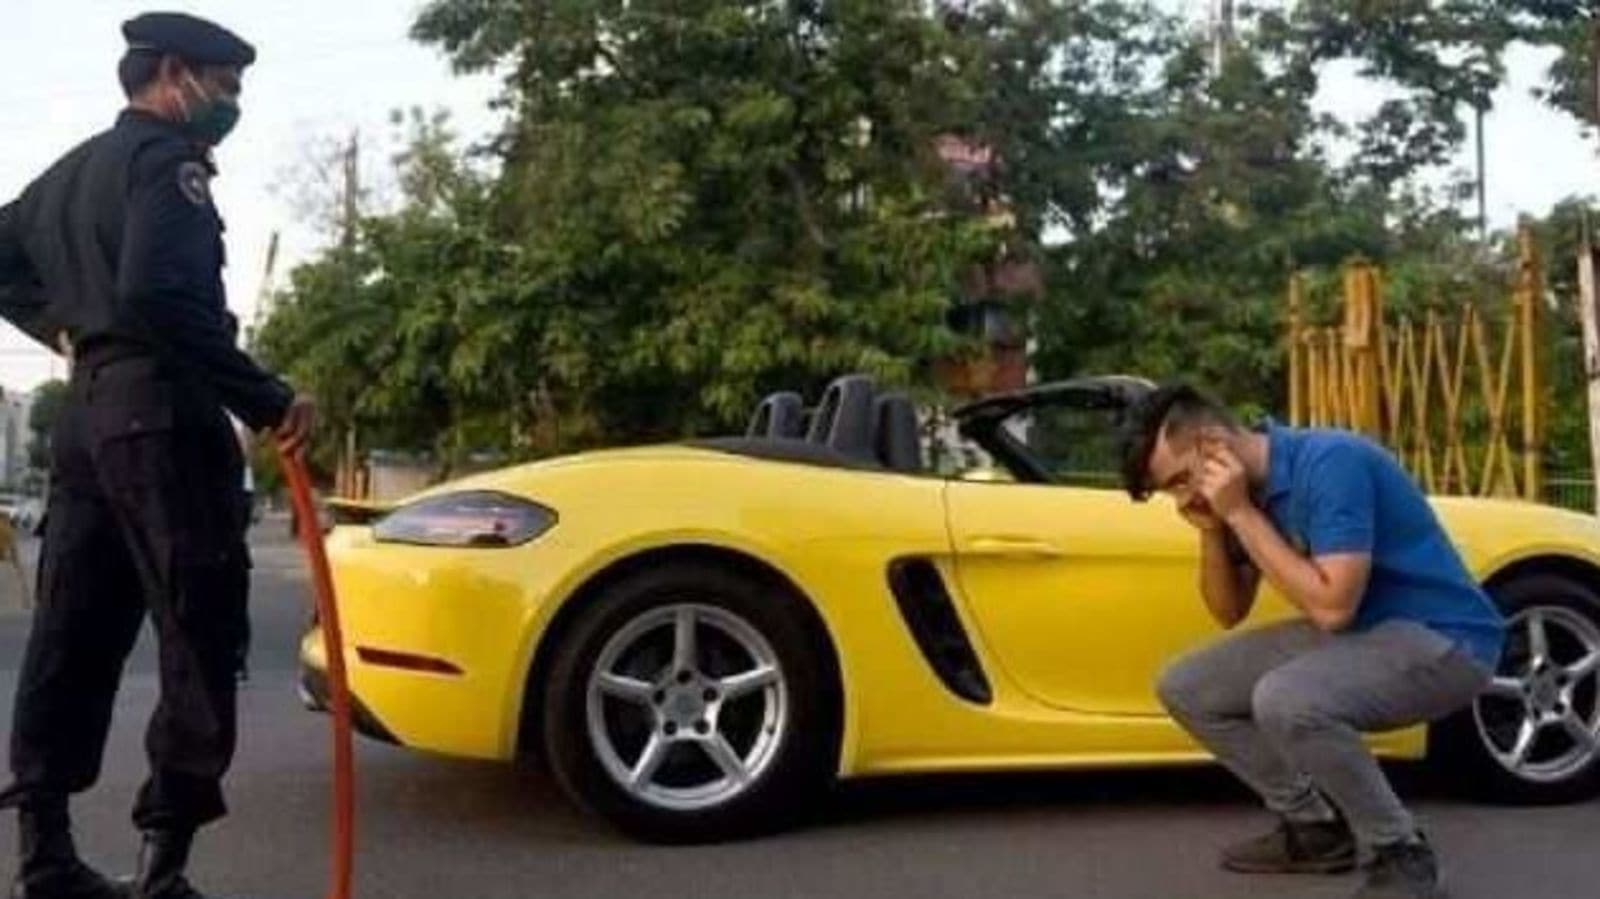 Porsche 718 Boxster driver made to do sit ups for joyride during lockdown